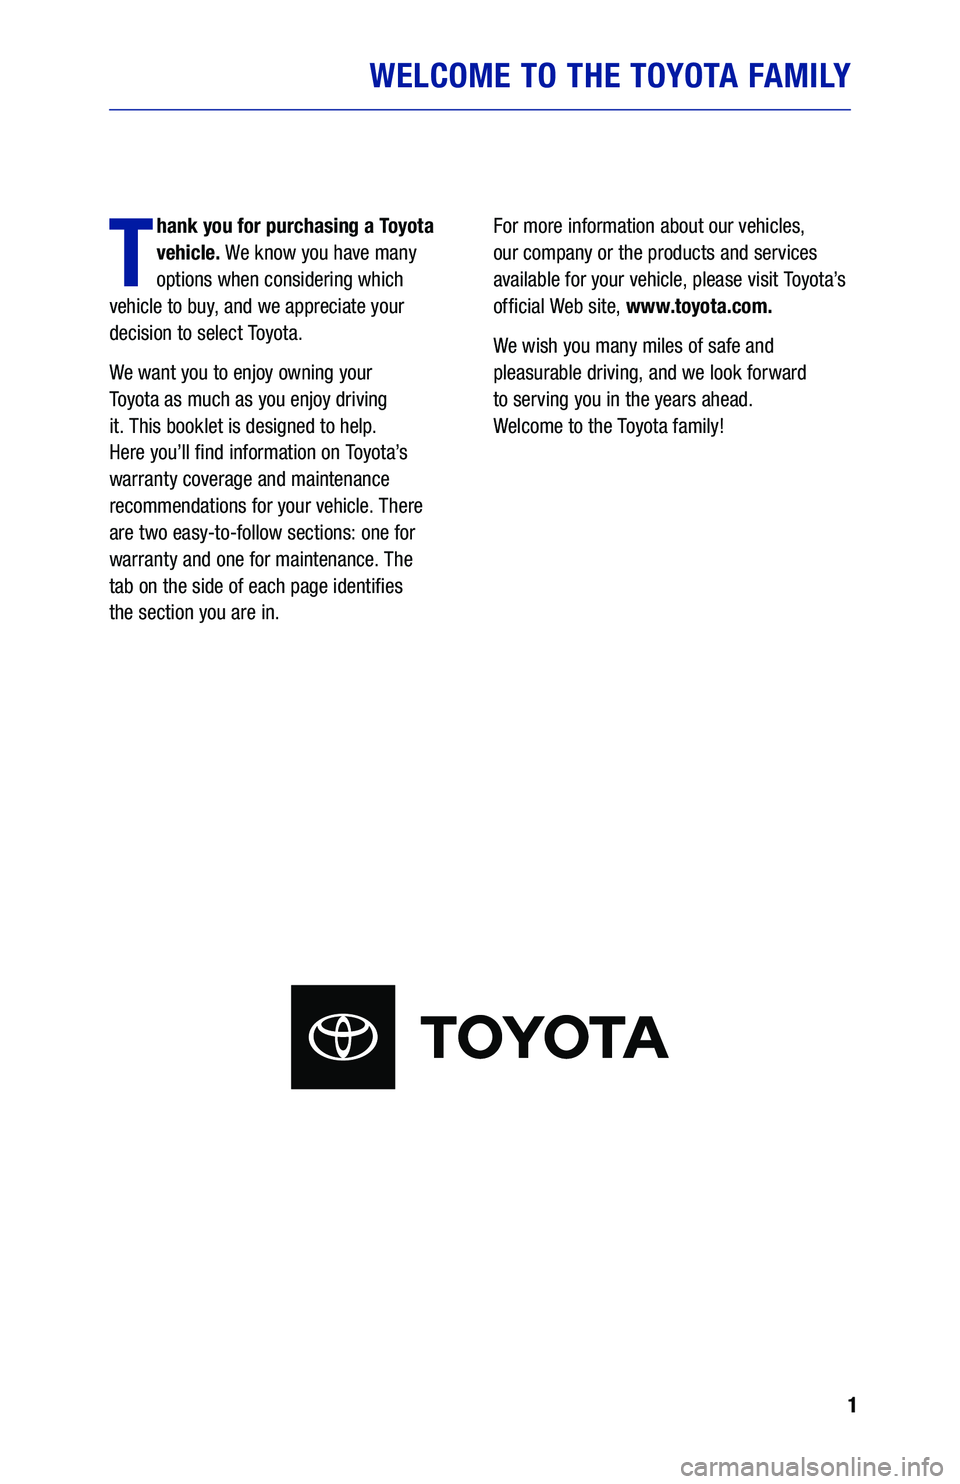 TOYOTA COROLLA HATCHBACK 2020  Warranties & Maintenance Guides (in English) 1
WELCOME TO THE TOYOTA FAMILY
T
hank you for purchasing a Toyota 
vehicle. We know you have many 
options when considering which  
vehicle to buy, and we appreciate your 
decision to select Toyota.
W